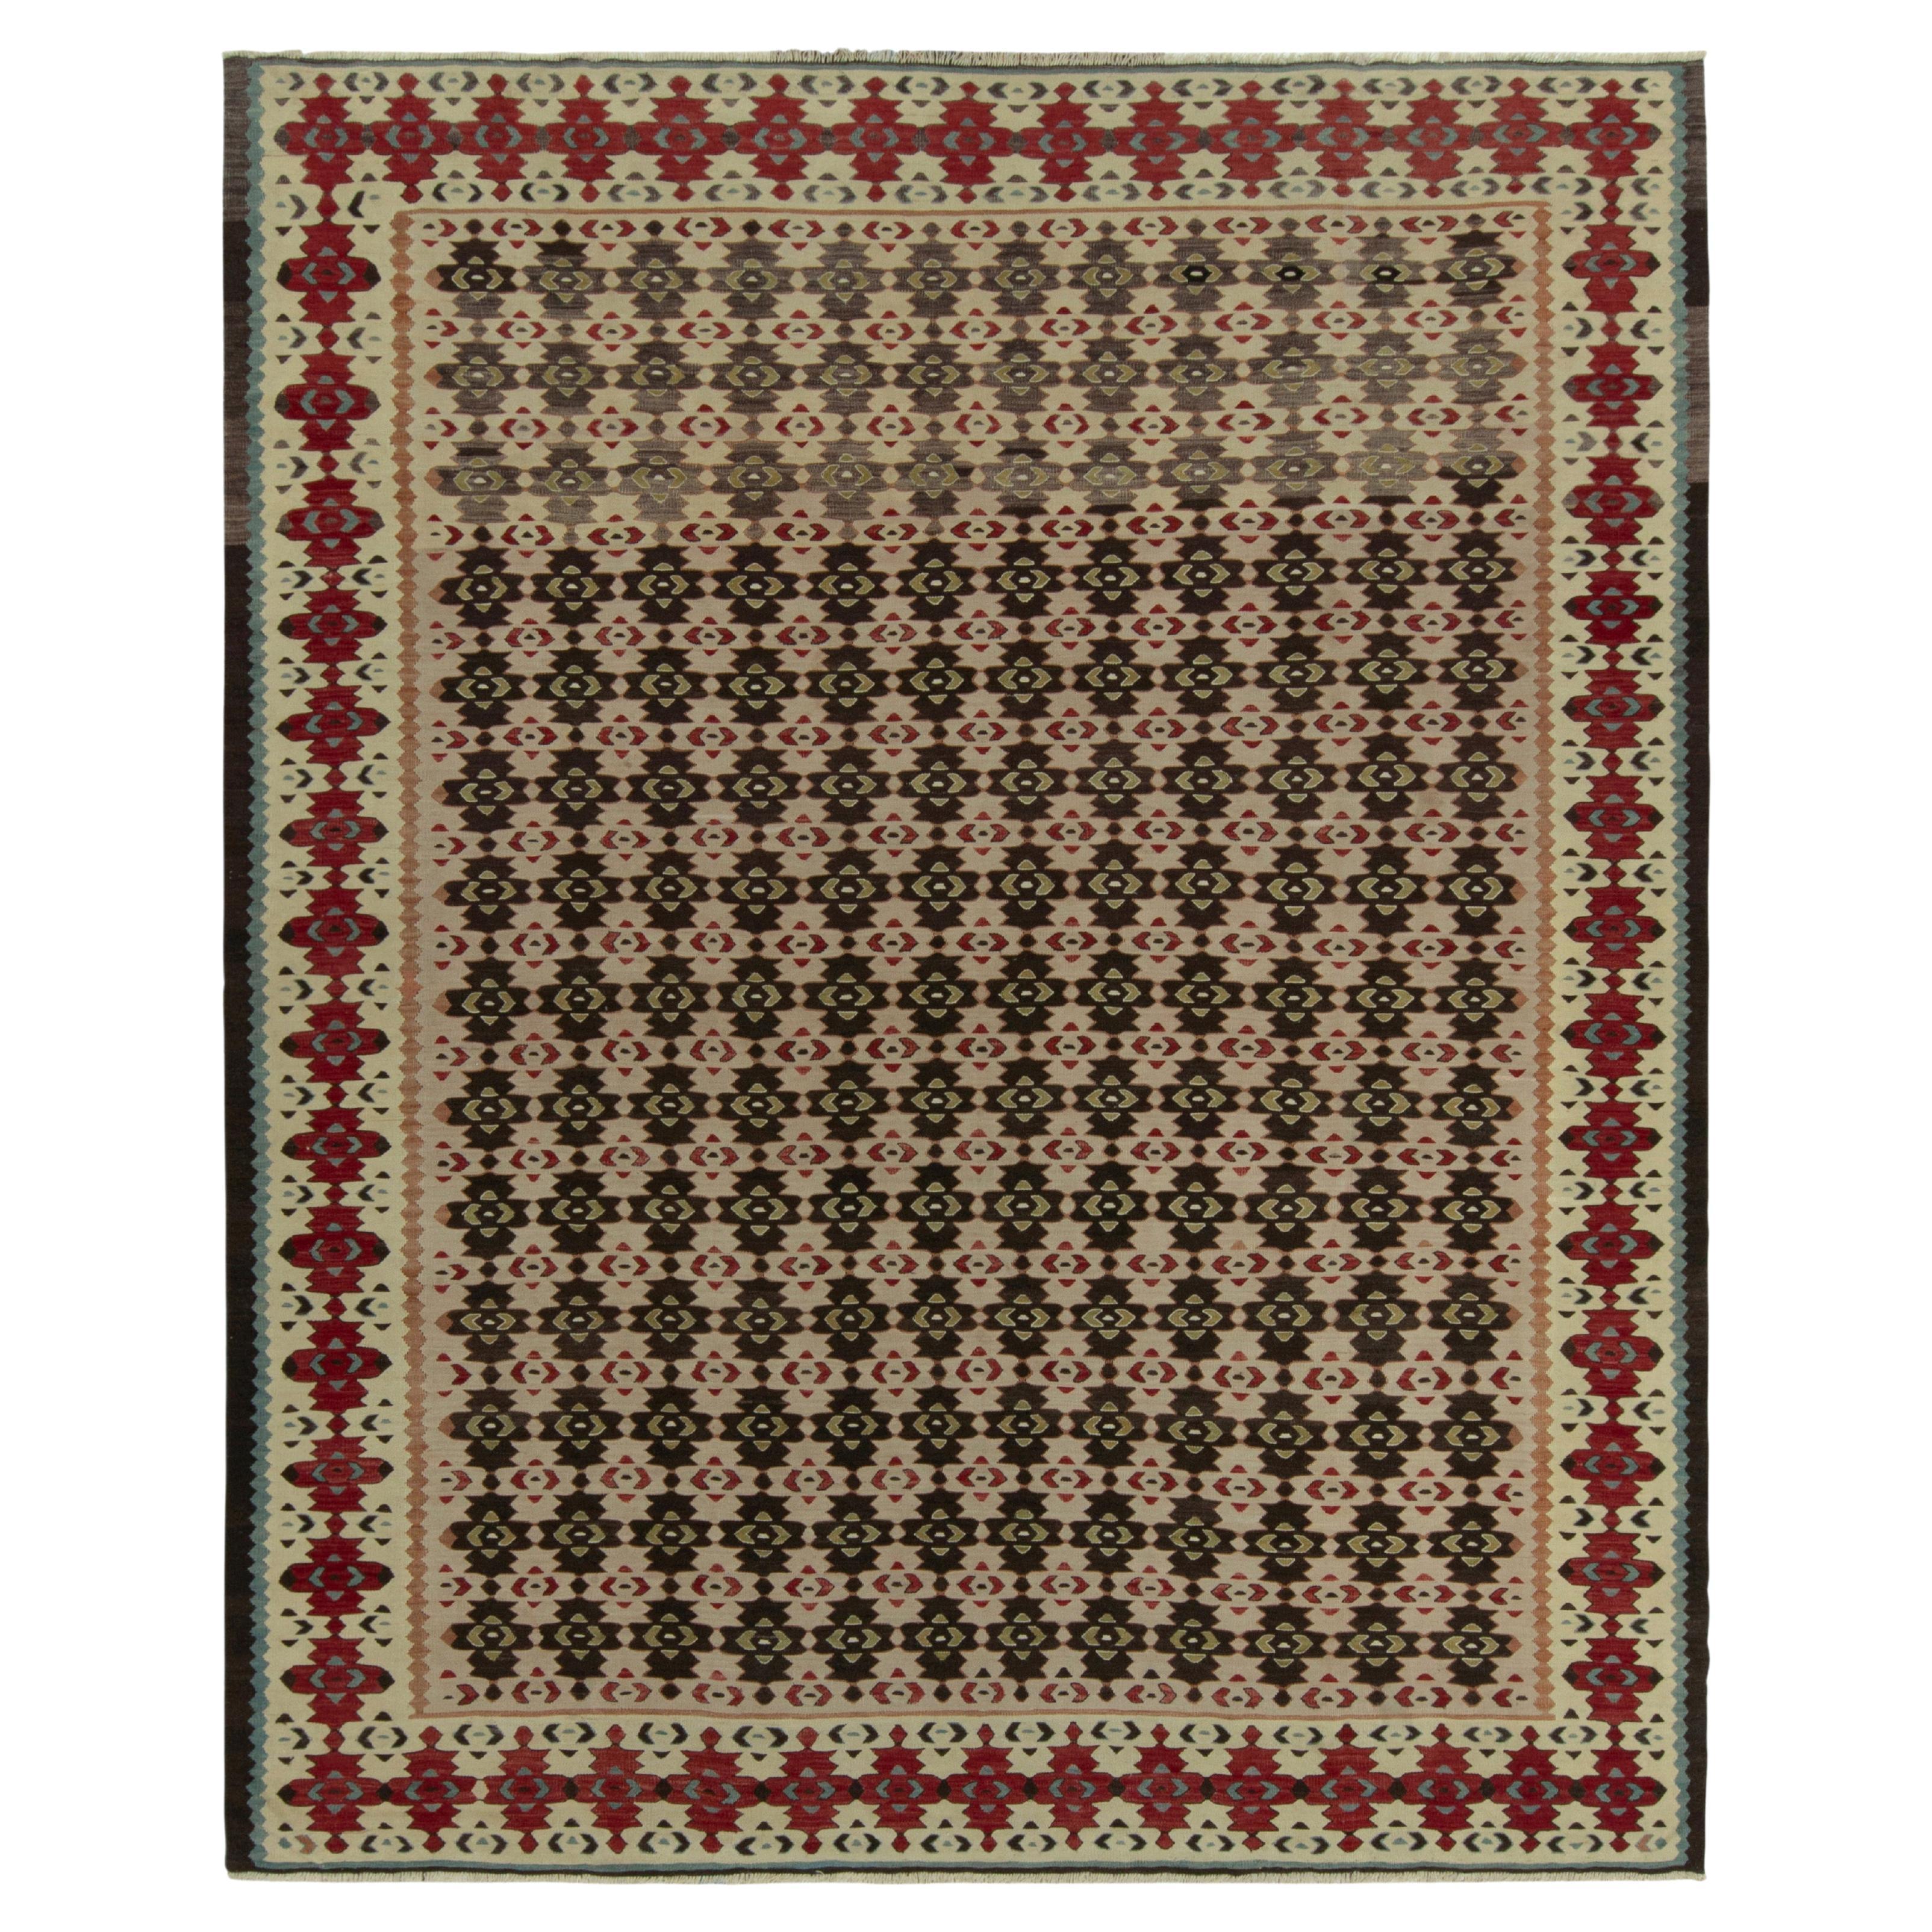 1920s Antique Kilim in Red & Beige-Brown Tribal Geometric Pattern by Rug & Kilim For Sale